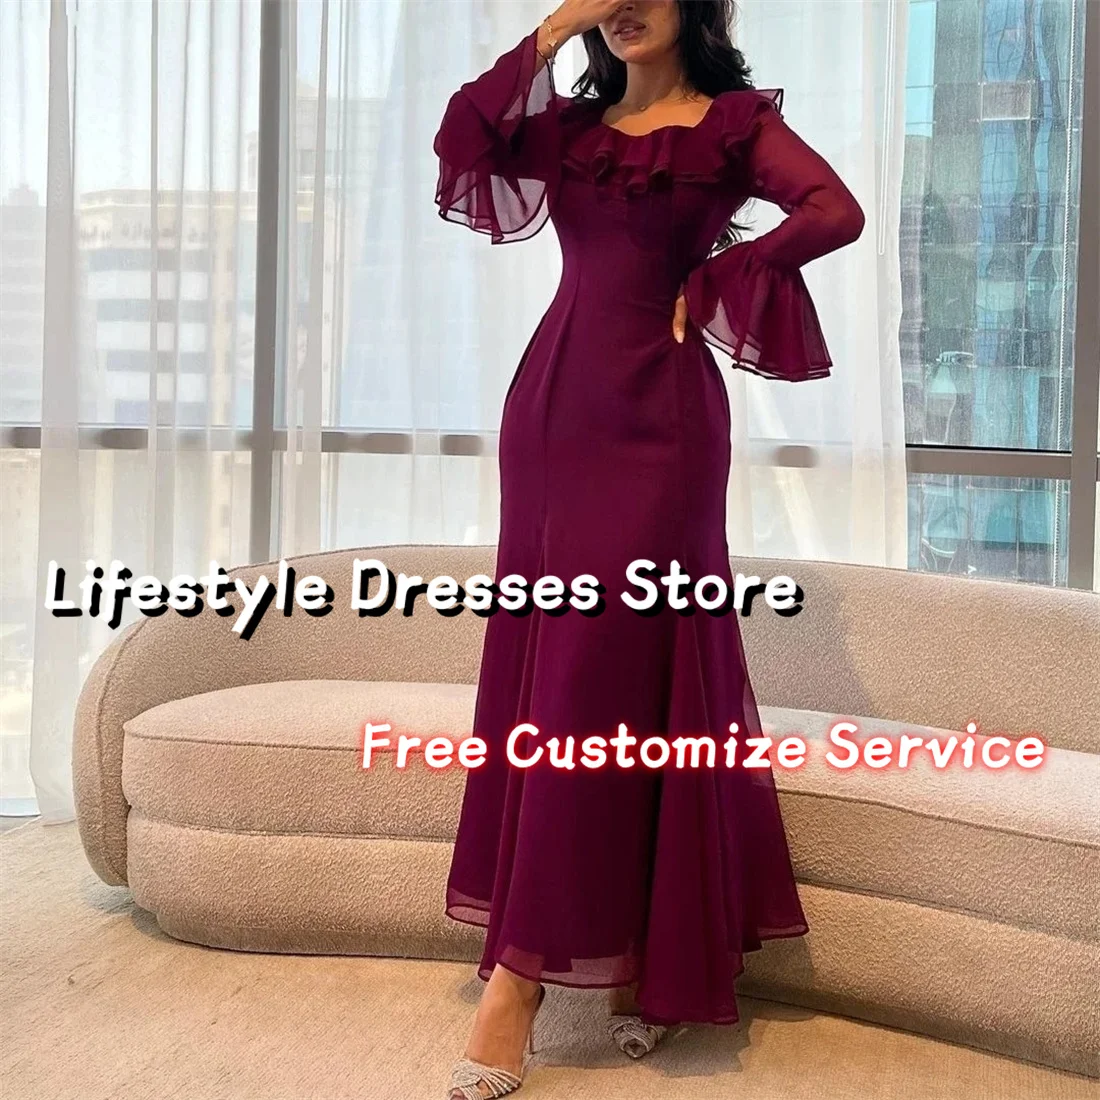 

Elegant Vintage Burgundy Evening Dresses Square Collar Ruffles A-Line Formal Occasion Prom Dress Long Sleeves Party Gowns